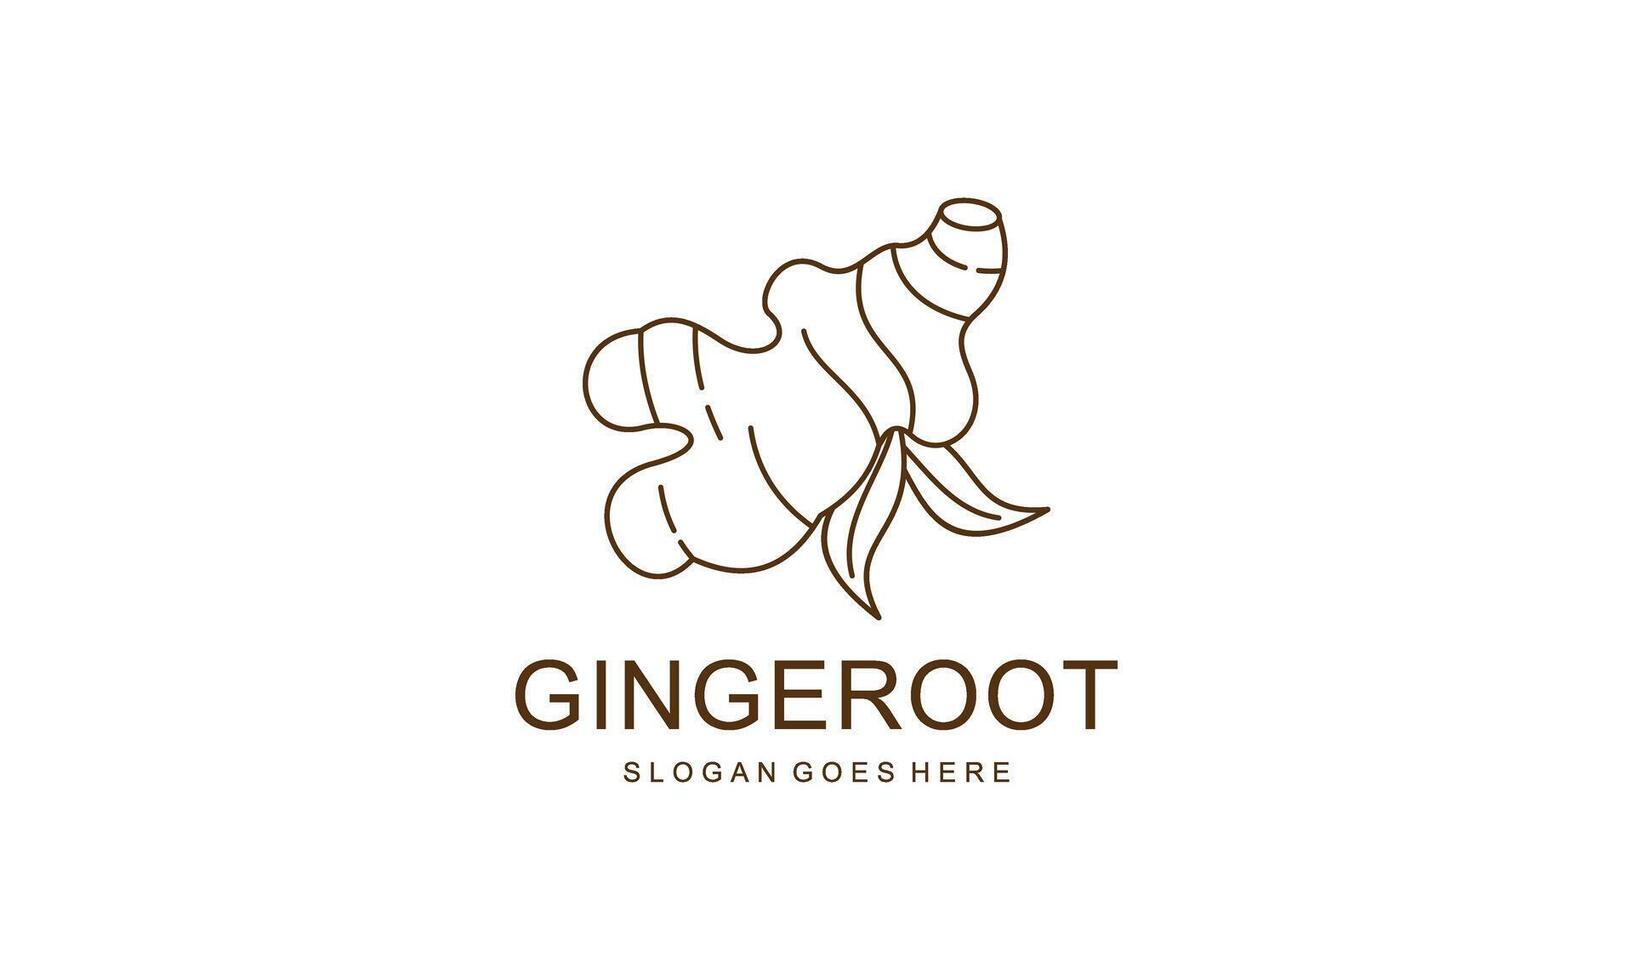 Ginger Root Logo Design. Herbal Spice Vector Isolated on White Background